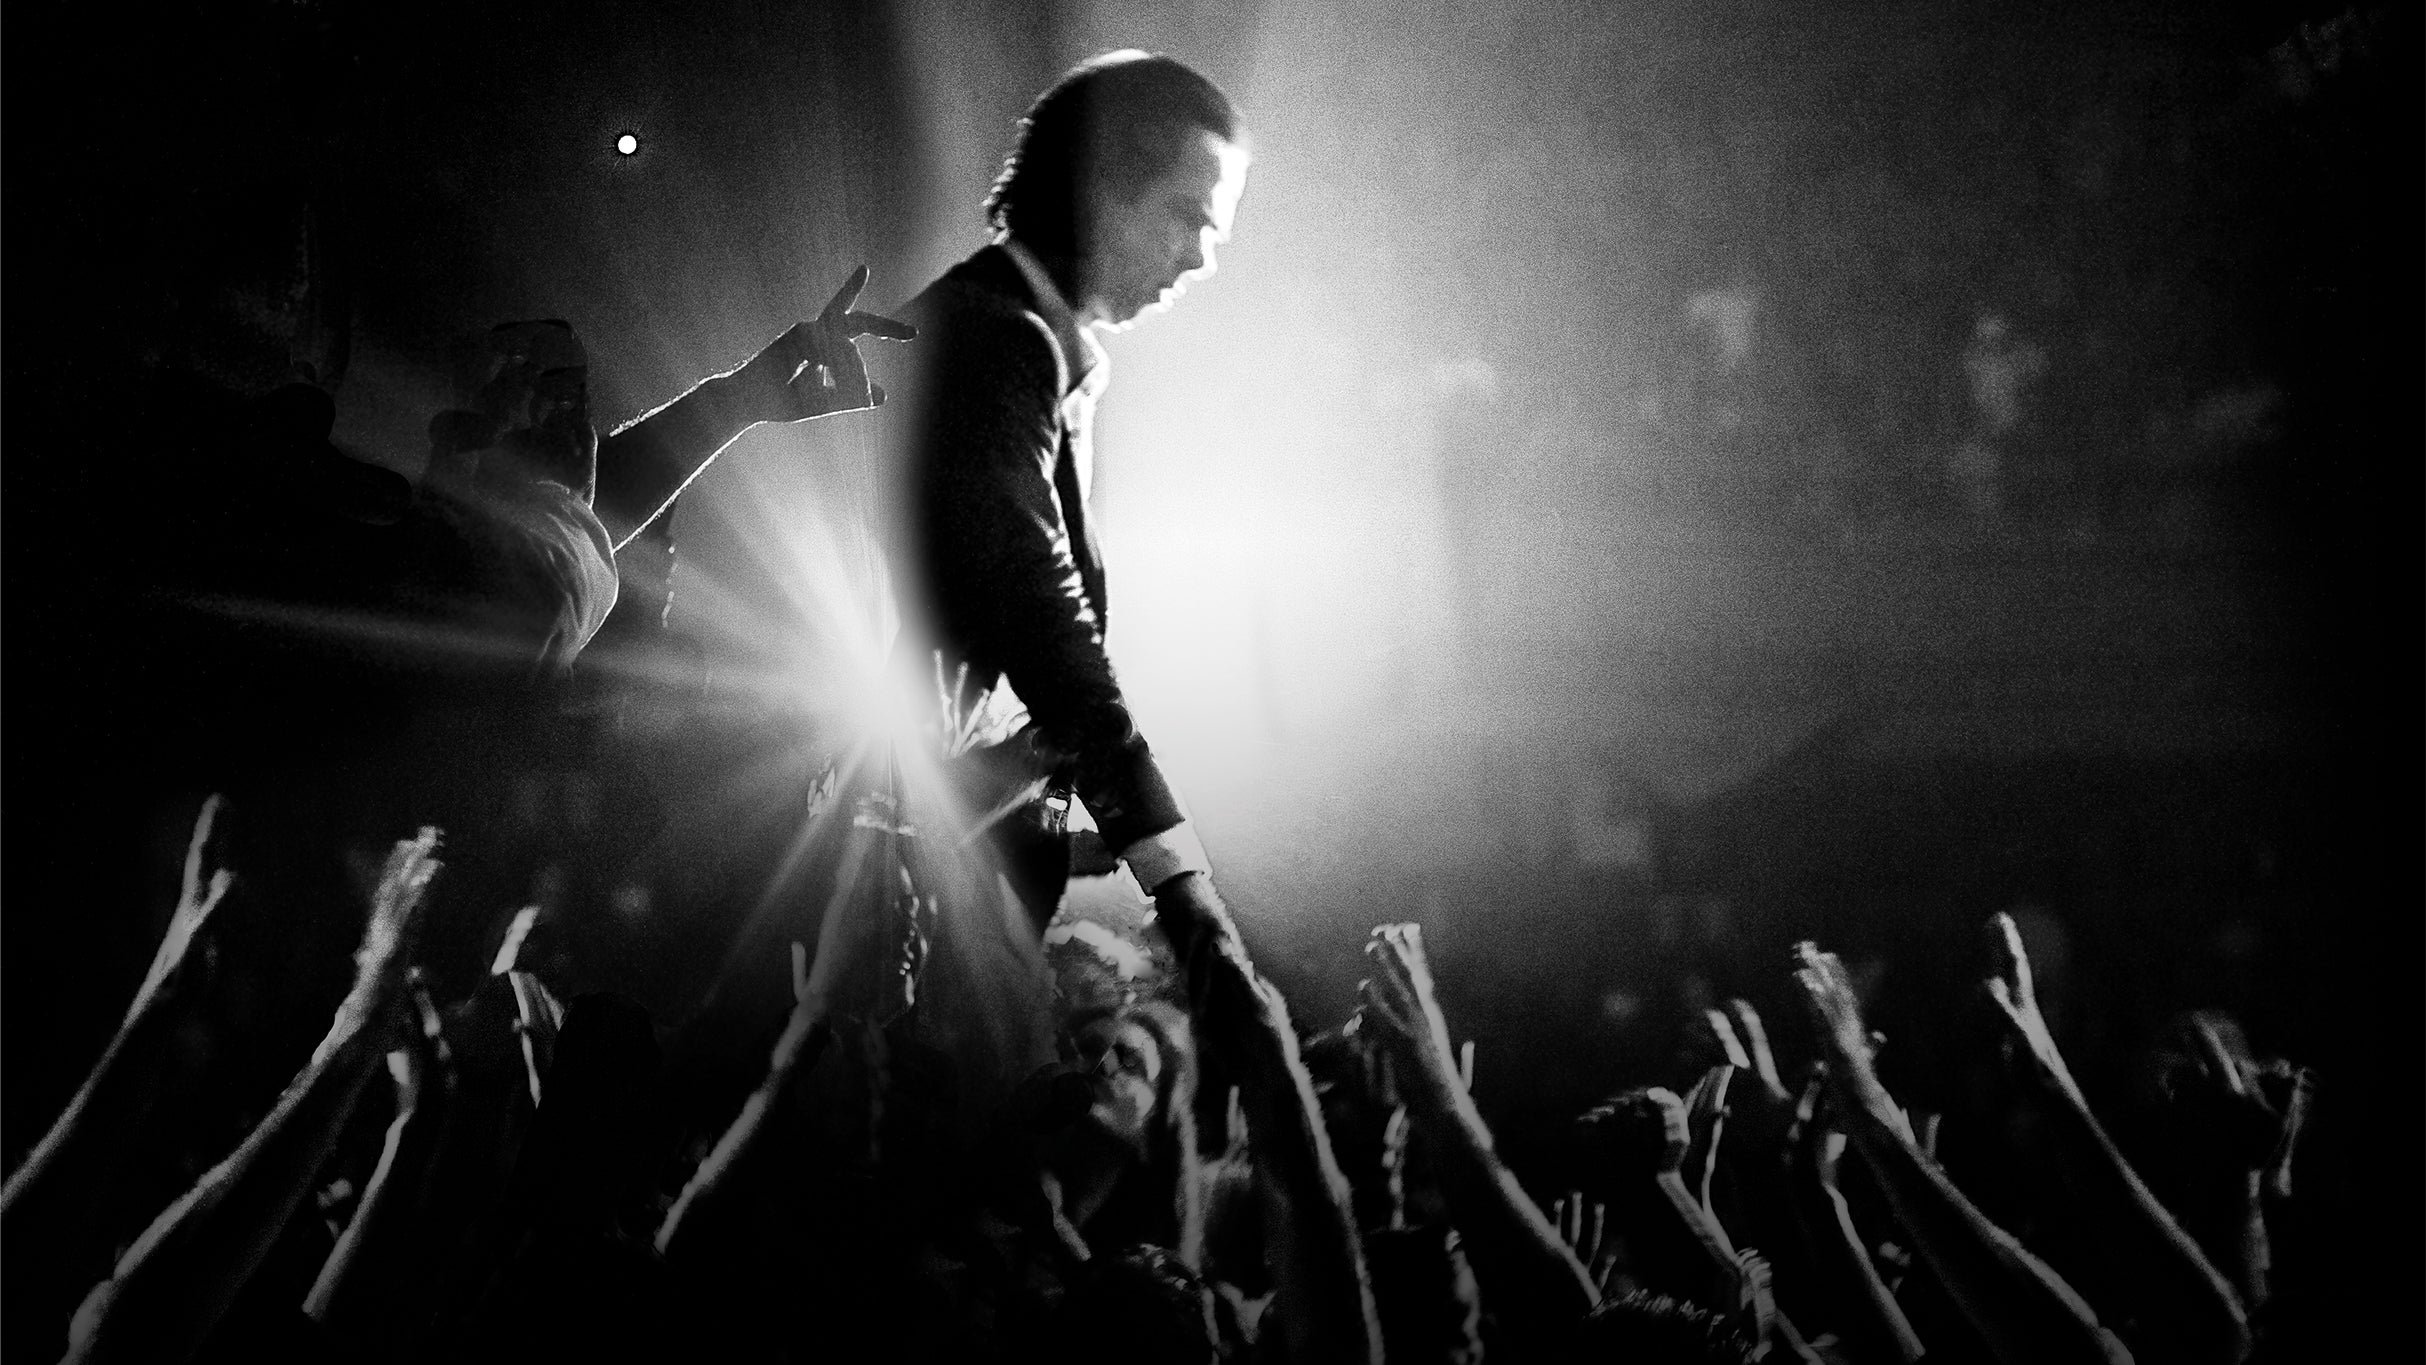 Nick Cave & the Bad Seeds:The Wild God Tour in Leeds promo photo for Three presale offer code